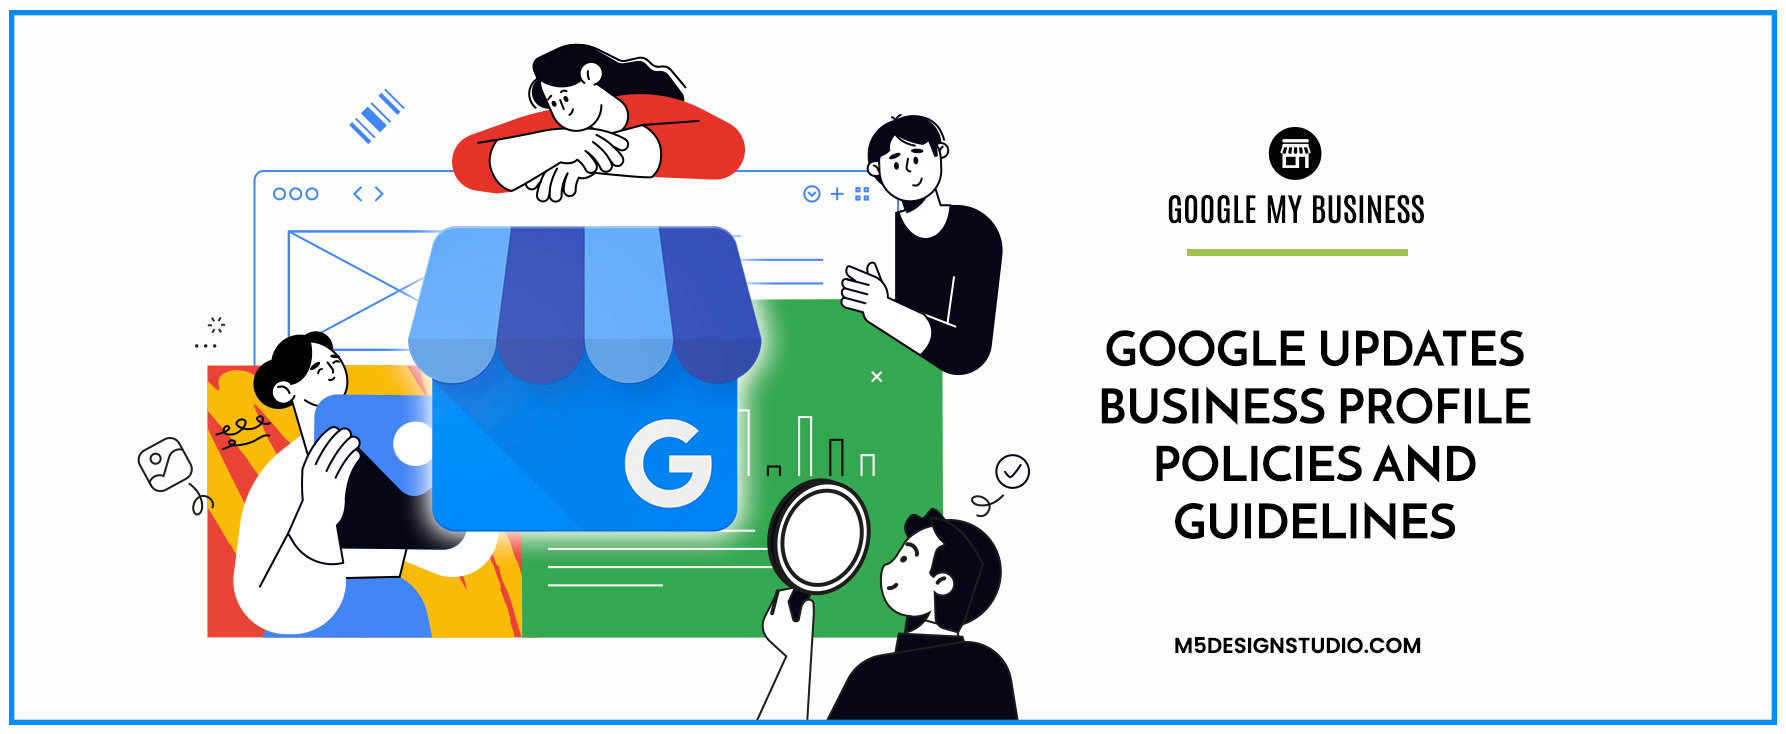 google updates business profile policies and guidelines